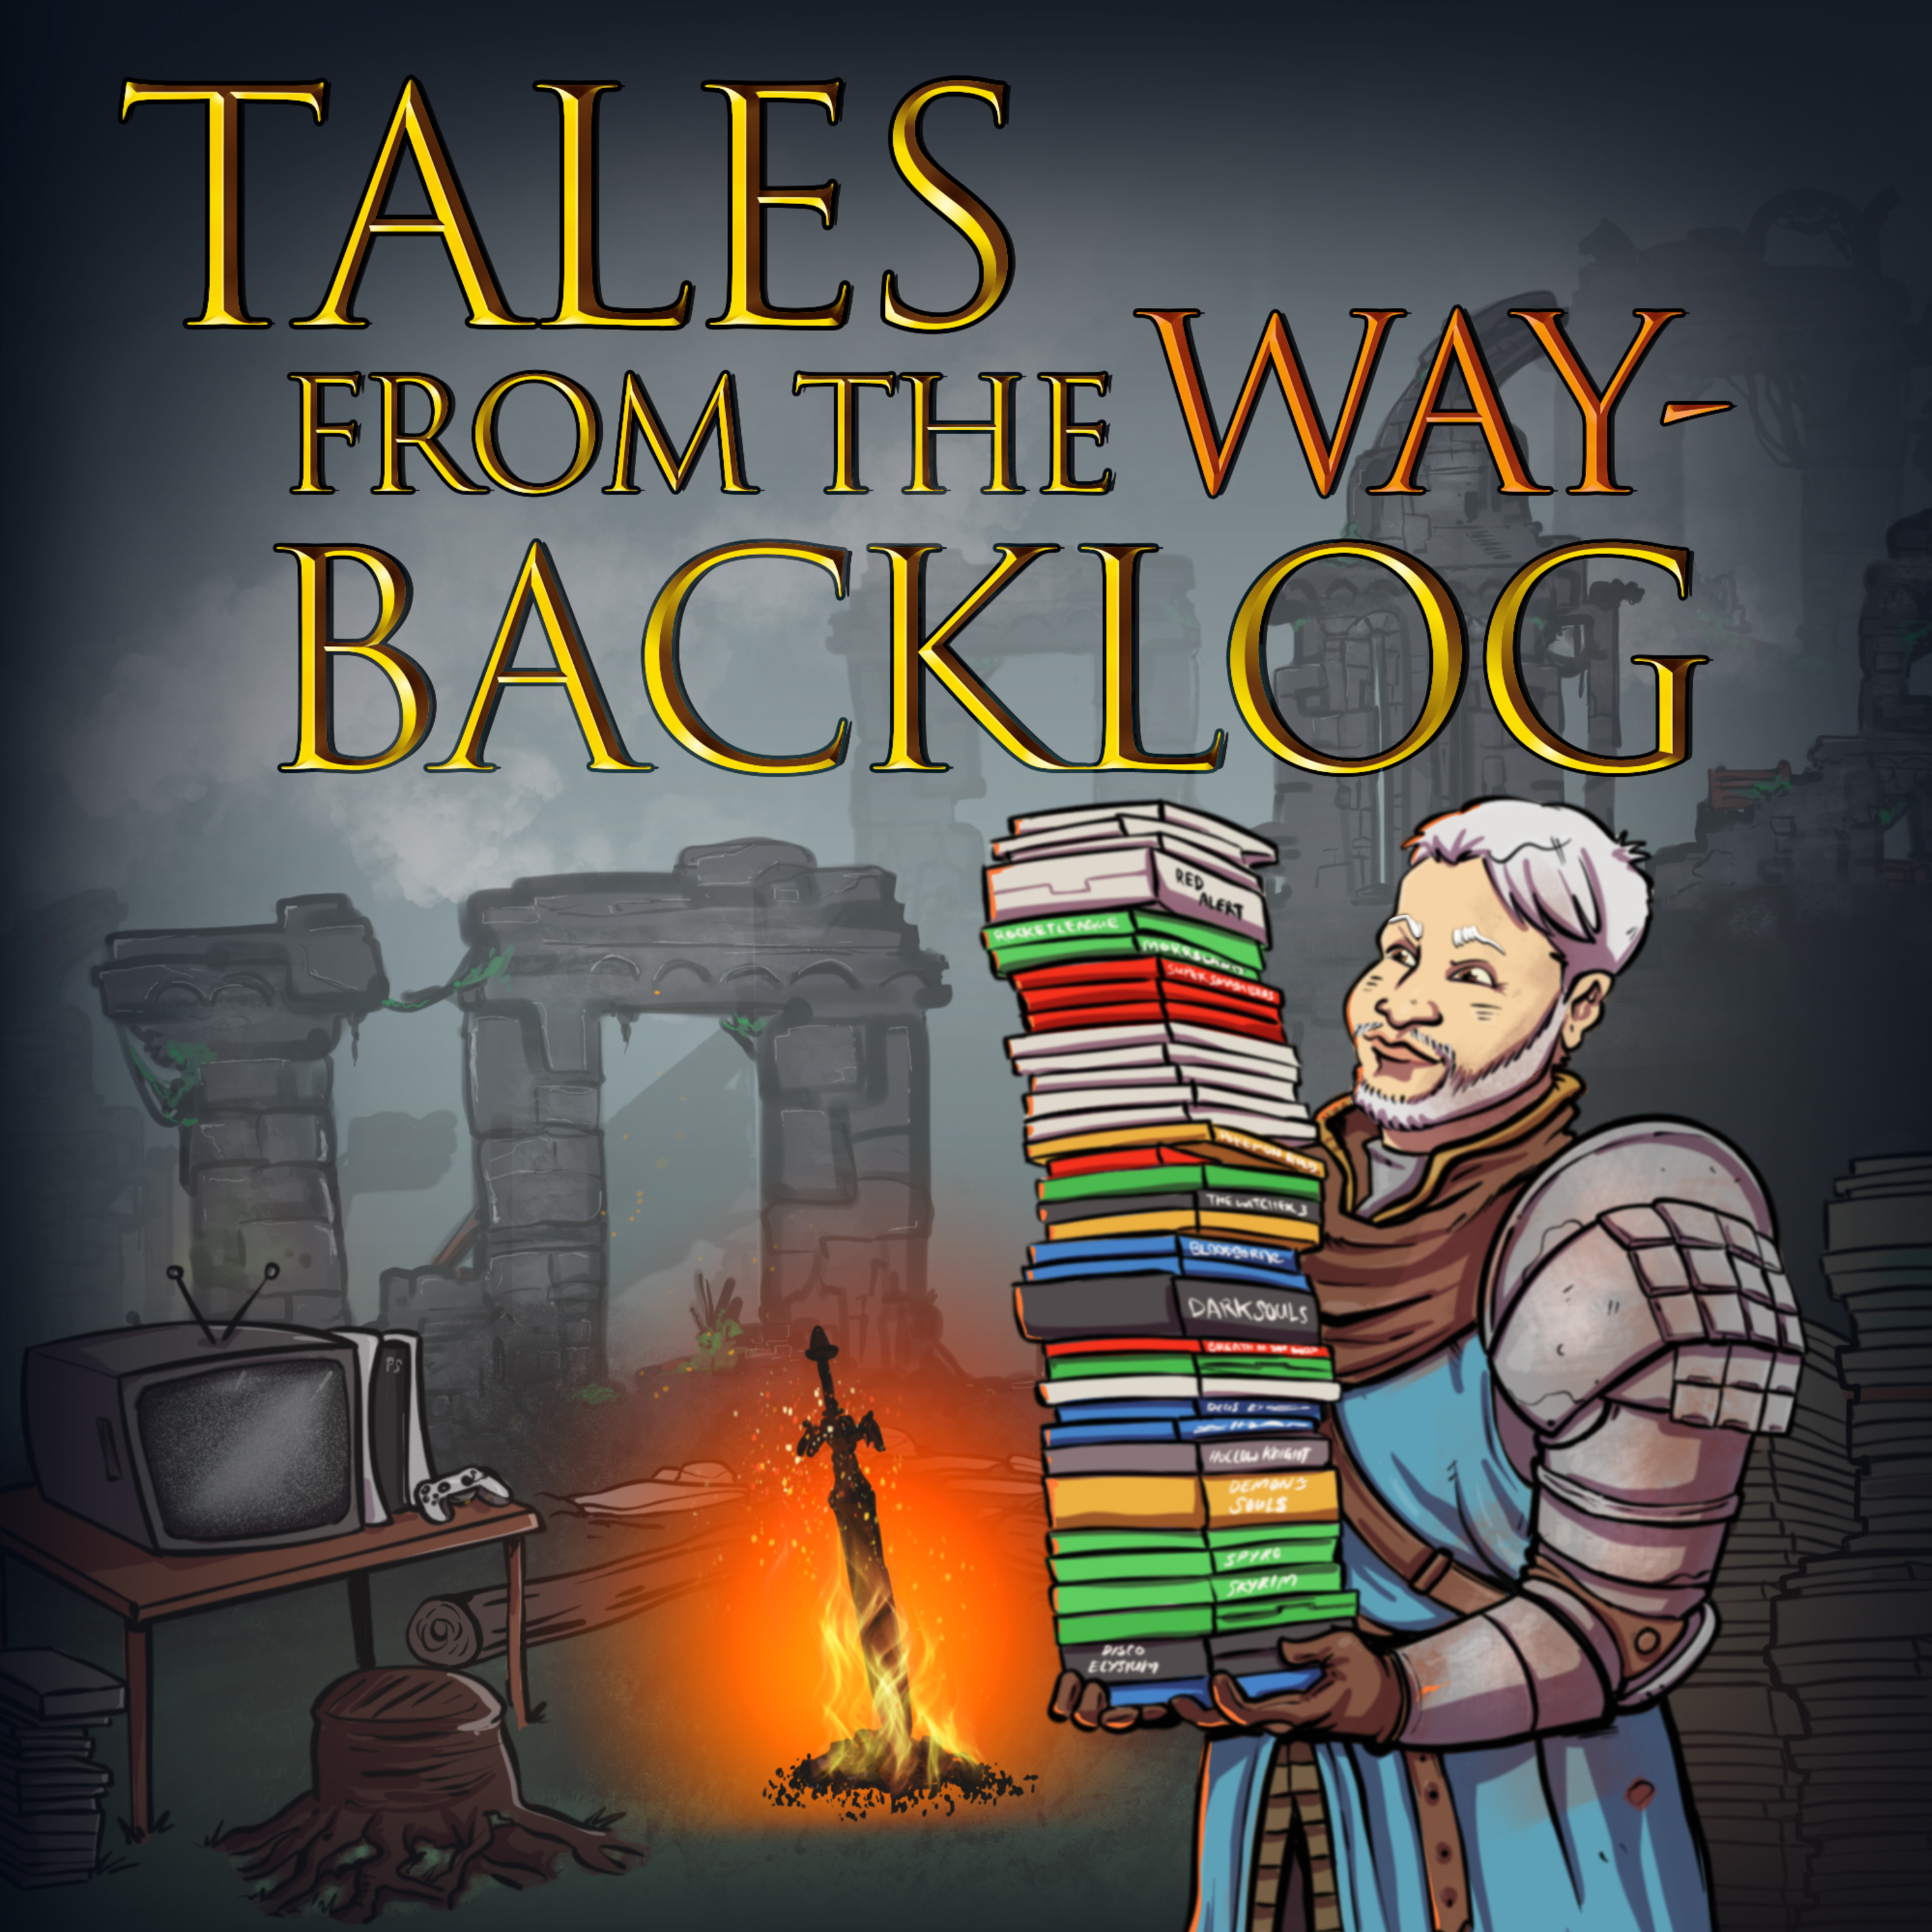 Introducing...Tales from the WAY Backlog! + Super Mario World